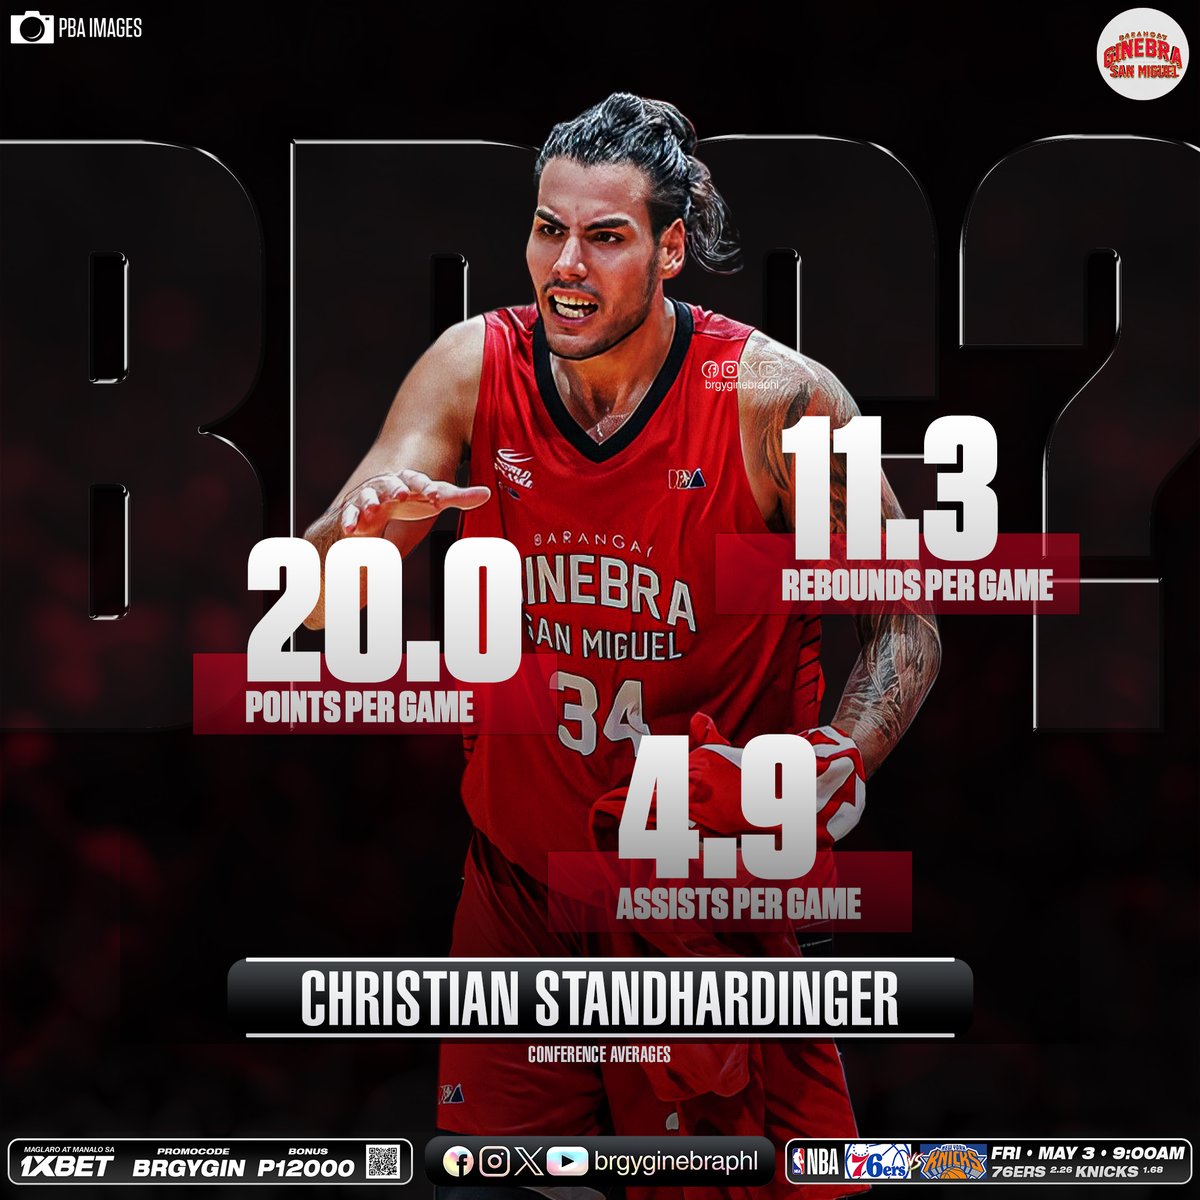 Another BPC-Type conference for Christian Standhardinger. 💪